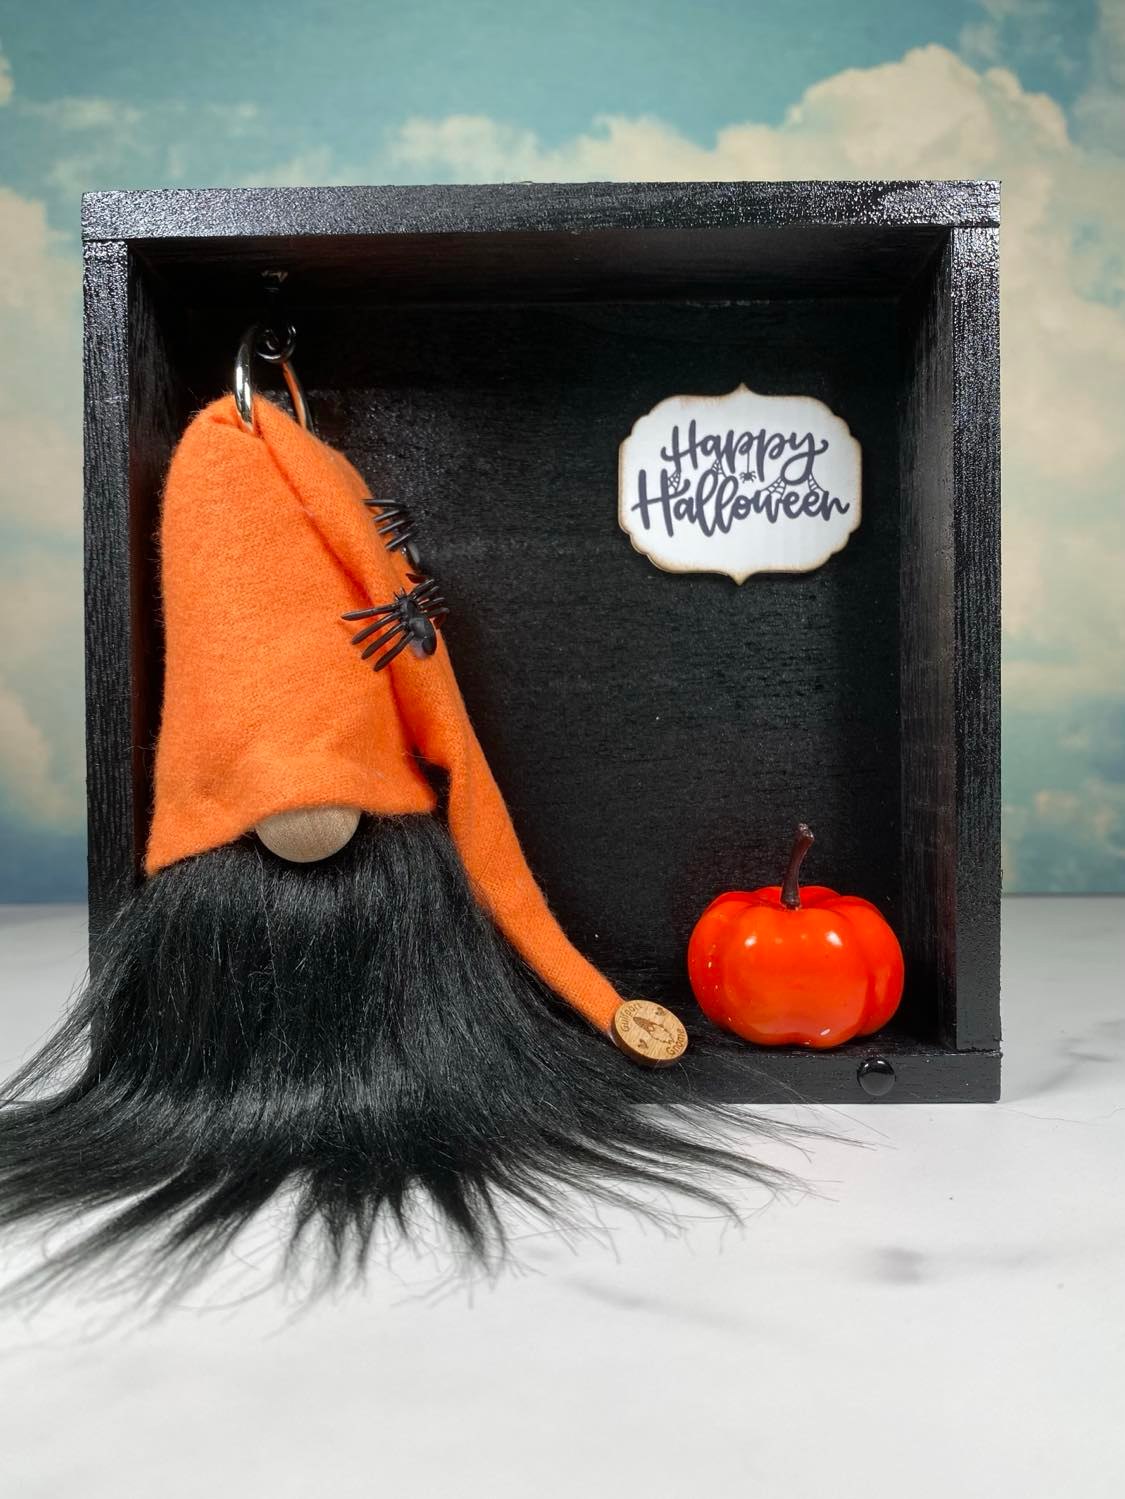 Gift Set - Happy Halloween Orange and Black Gnome and Spiders Gift set with pumpkin and 4" Plush Gnome